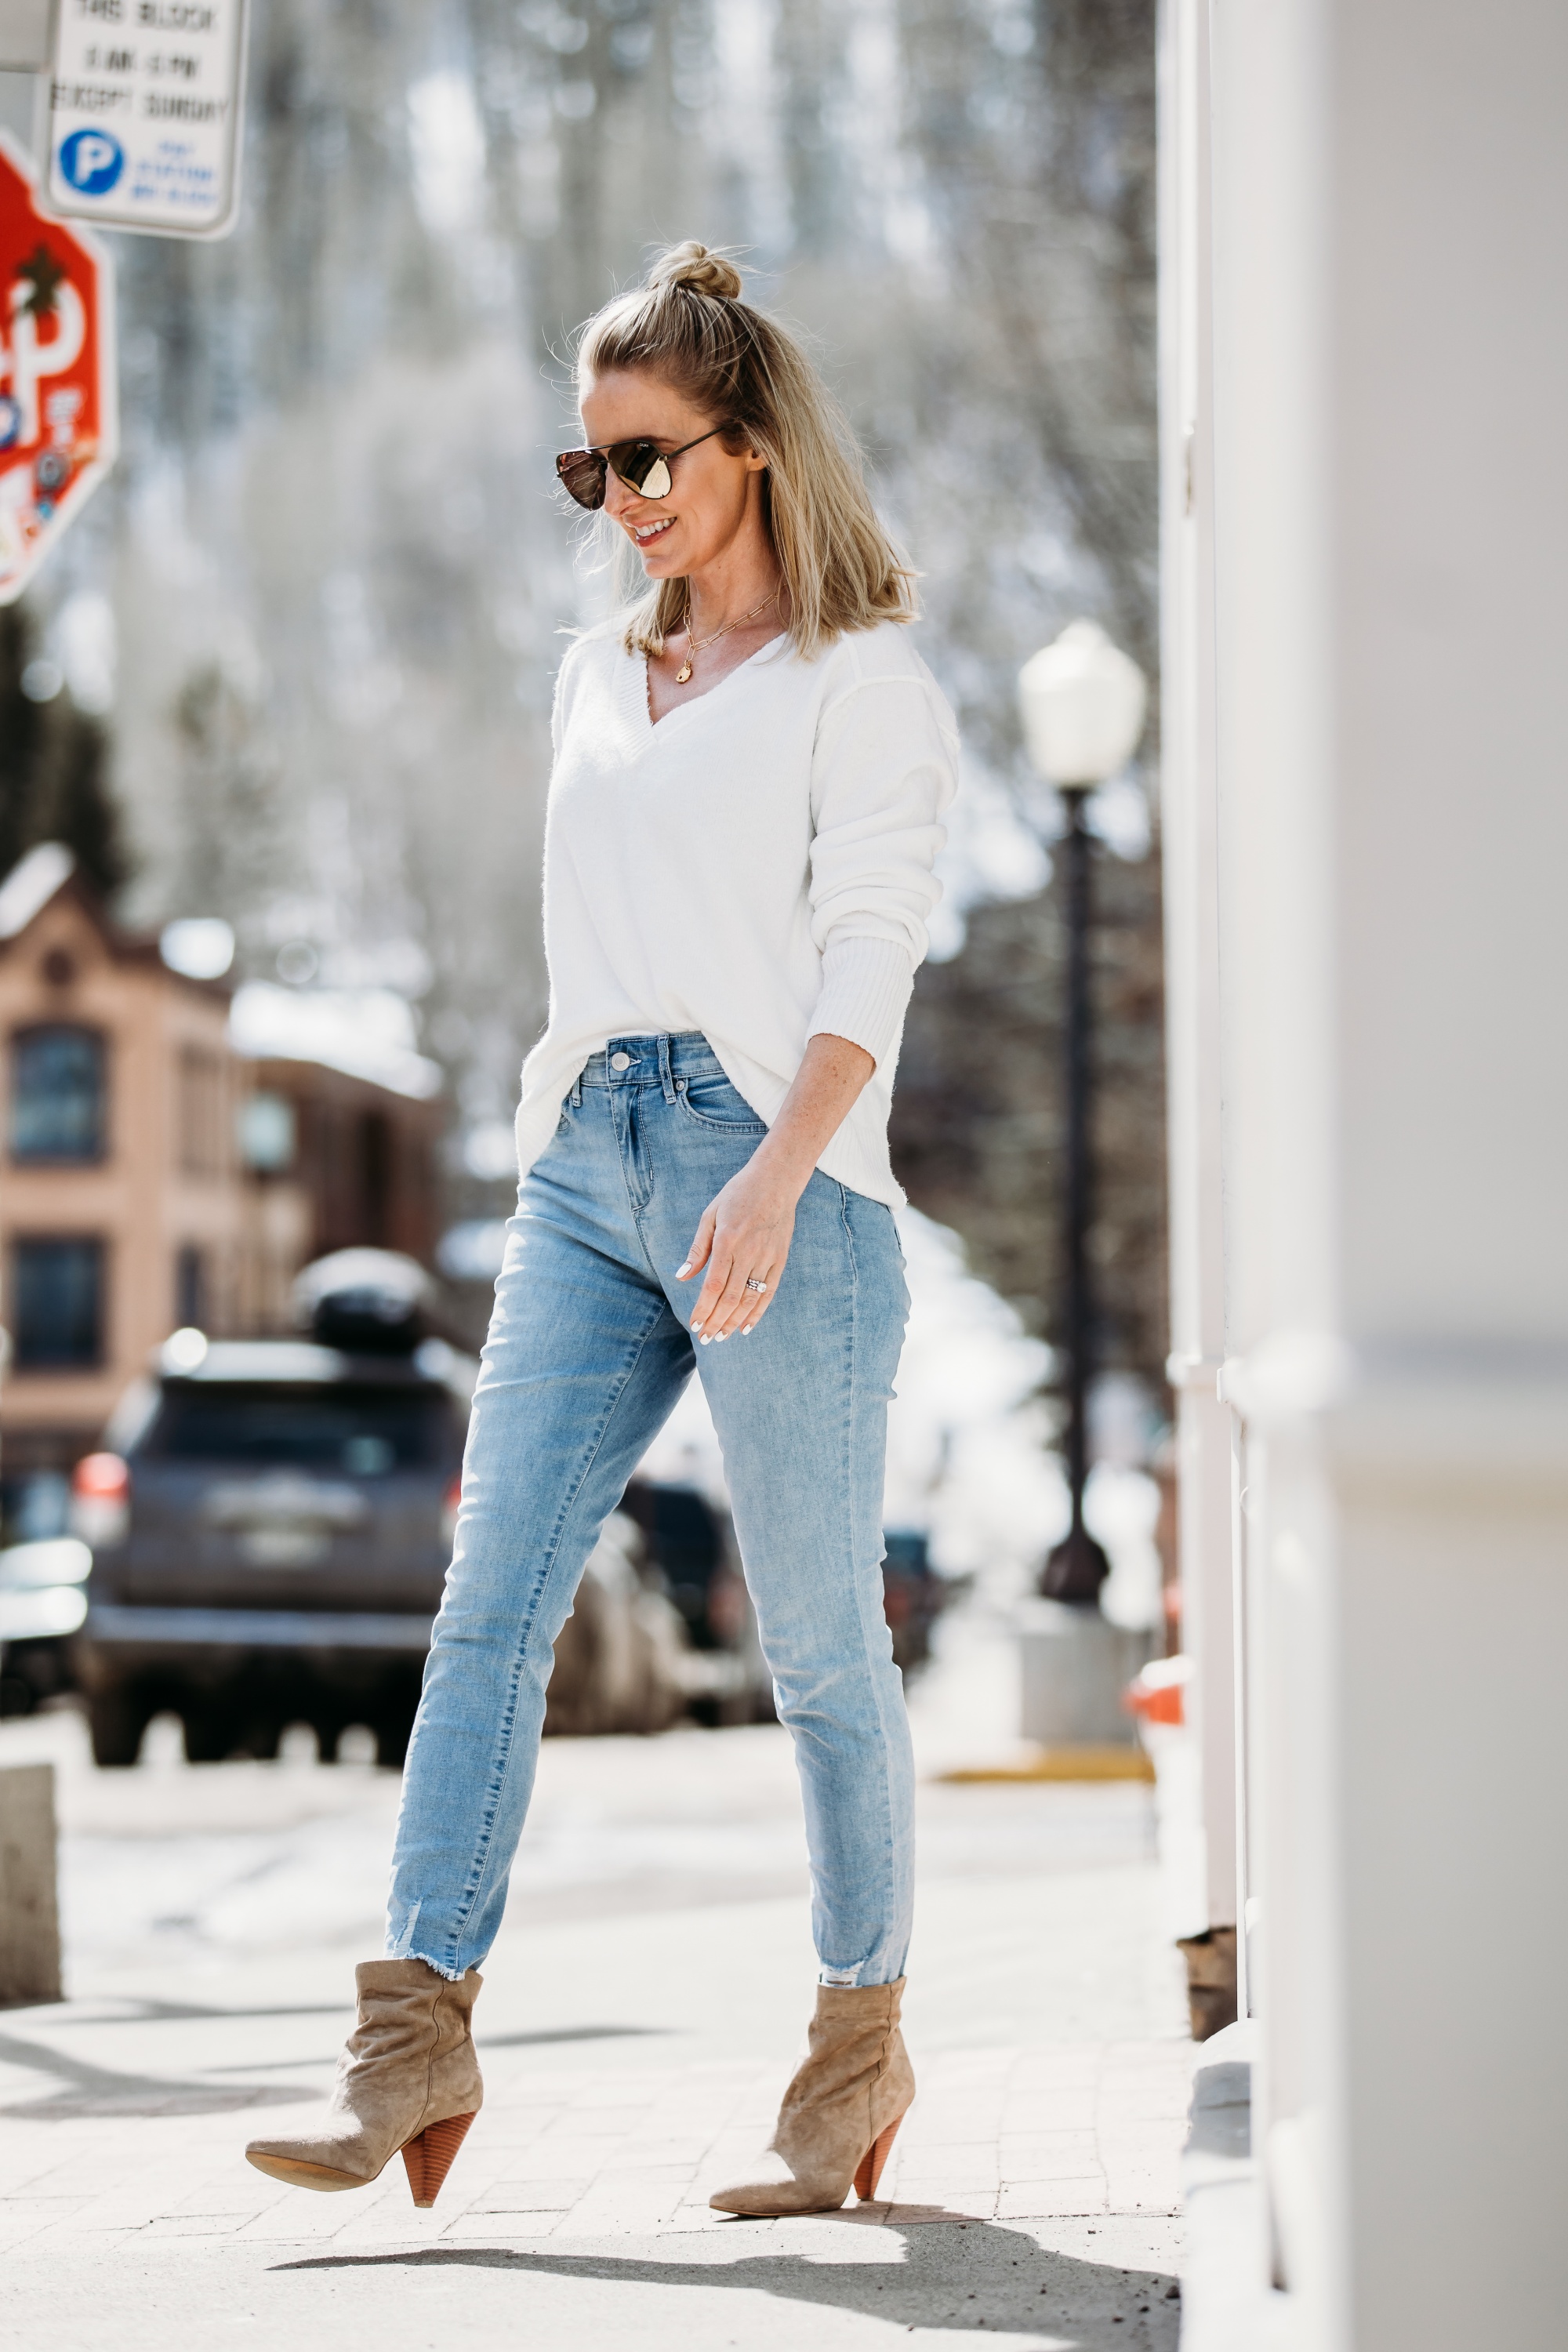 White Sweaters, Fashion blogger Erin Busbee of BusbeeStyle.com wearing a white v-neck sweater by Scoop, light wash skinny jeans by Sofia Vergara, brown suede booties, and green mirrored QUAY sunglasses from Walmart walking in Telluride, Colorado